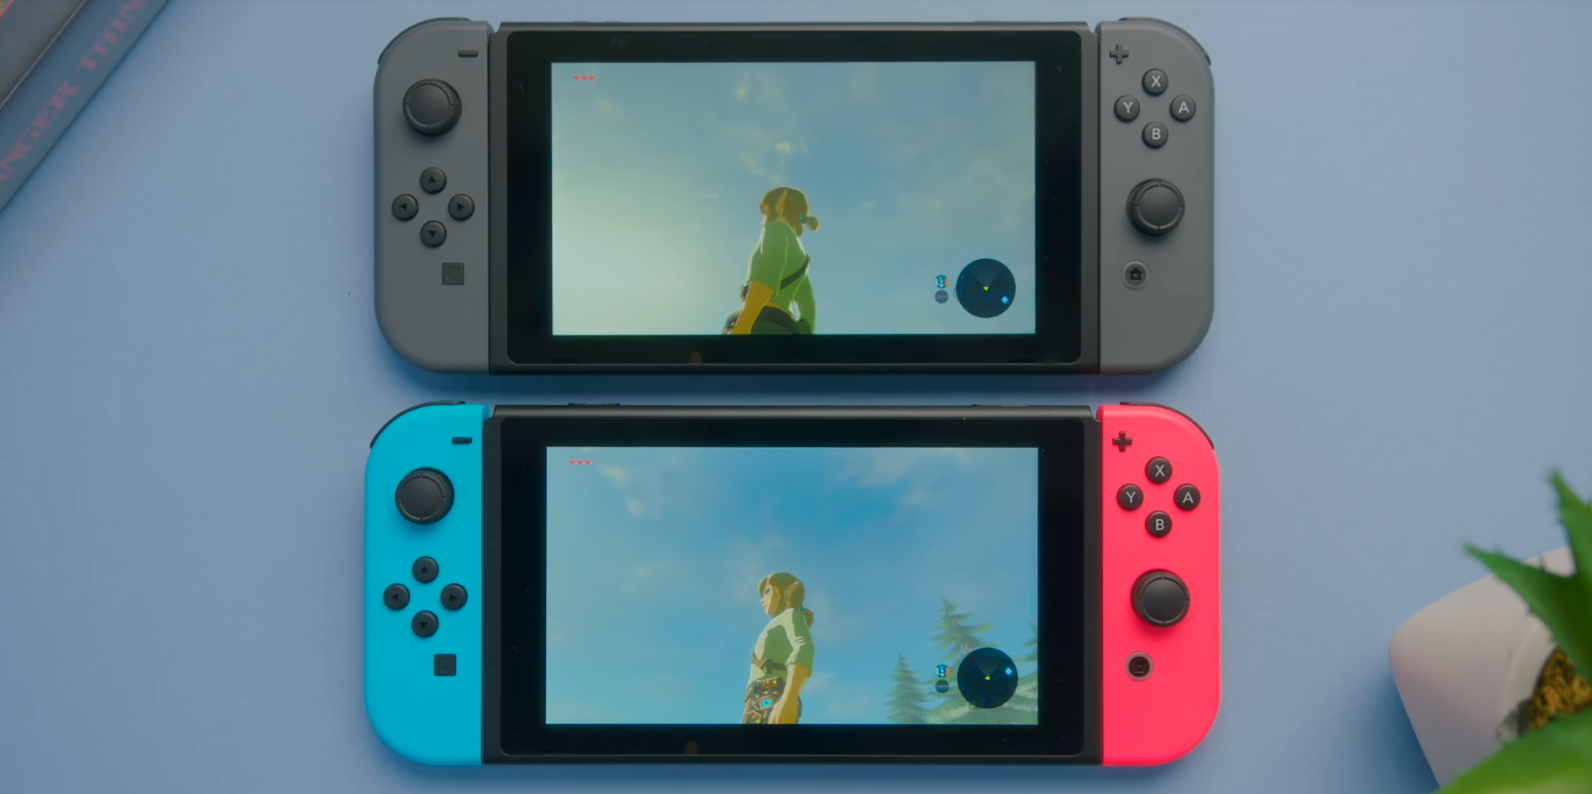 New Nintendo Switch Has A Slightly Improved Display Test Suggests